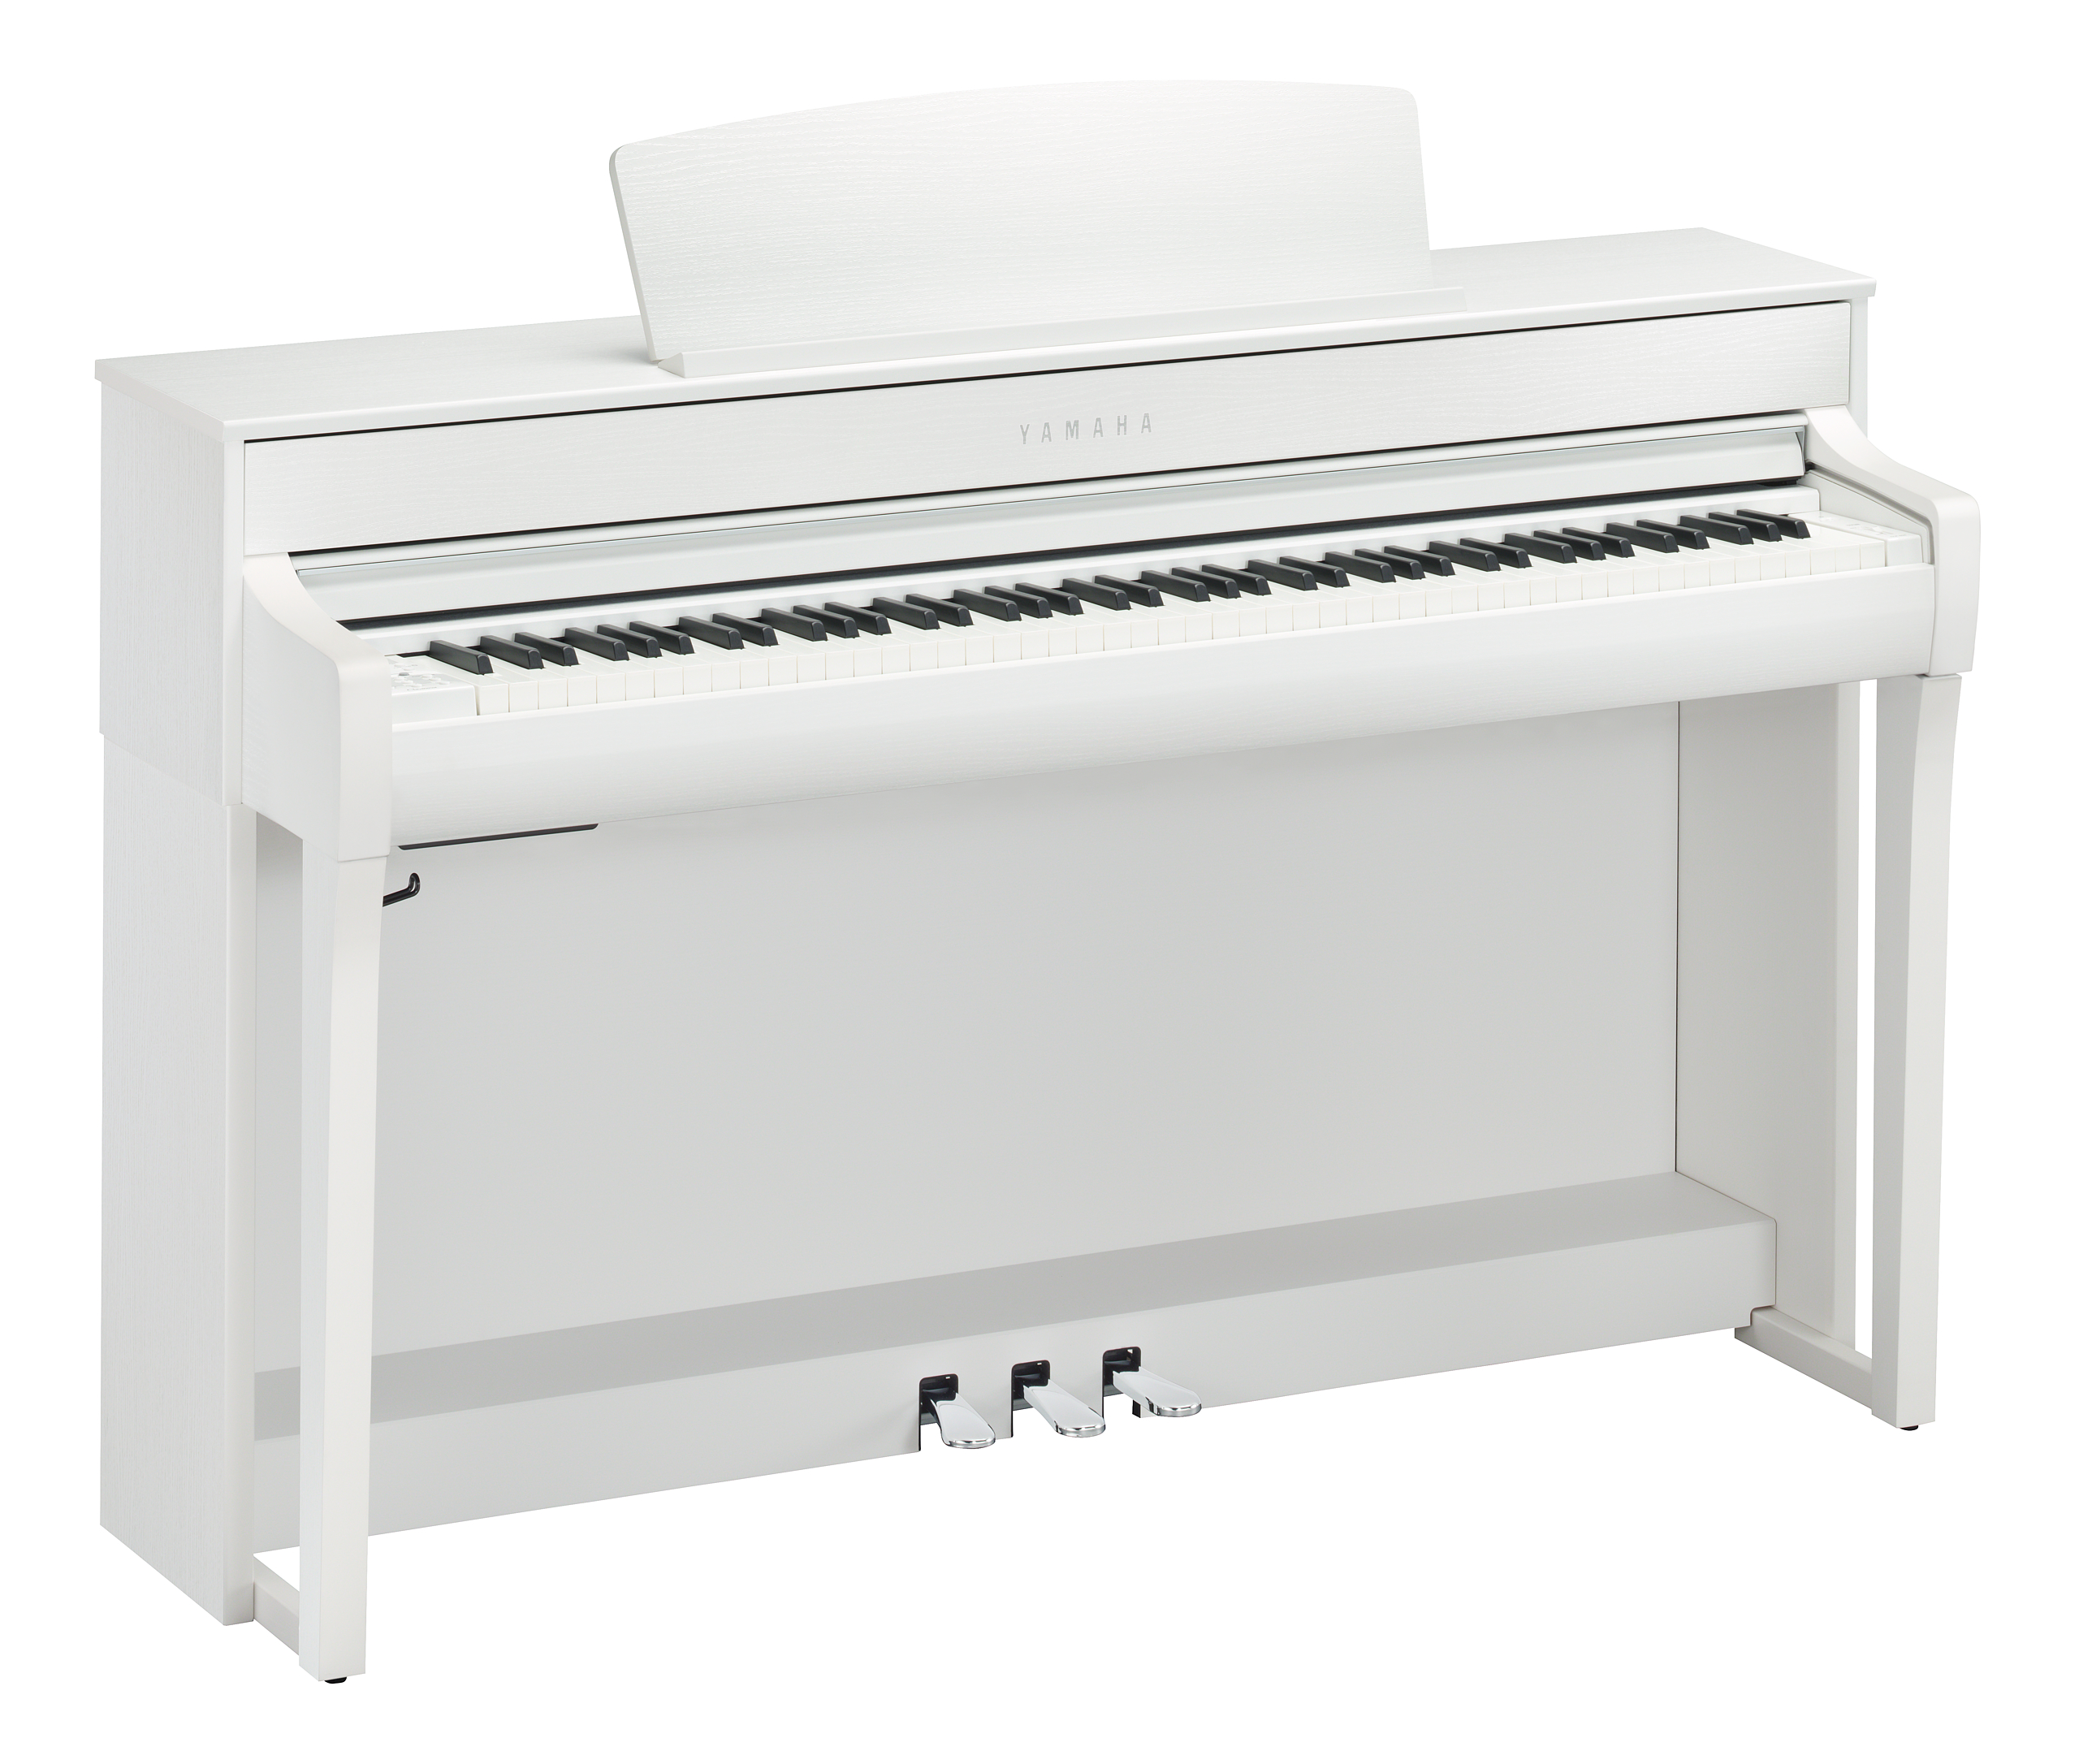 Yamaha Clp745wh - Digital piano with stand - Variation 1